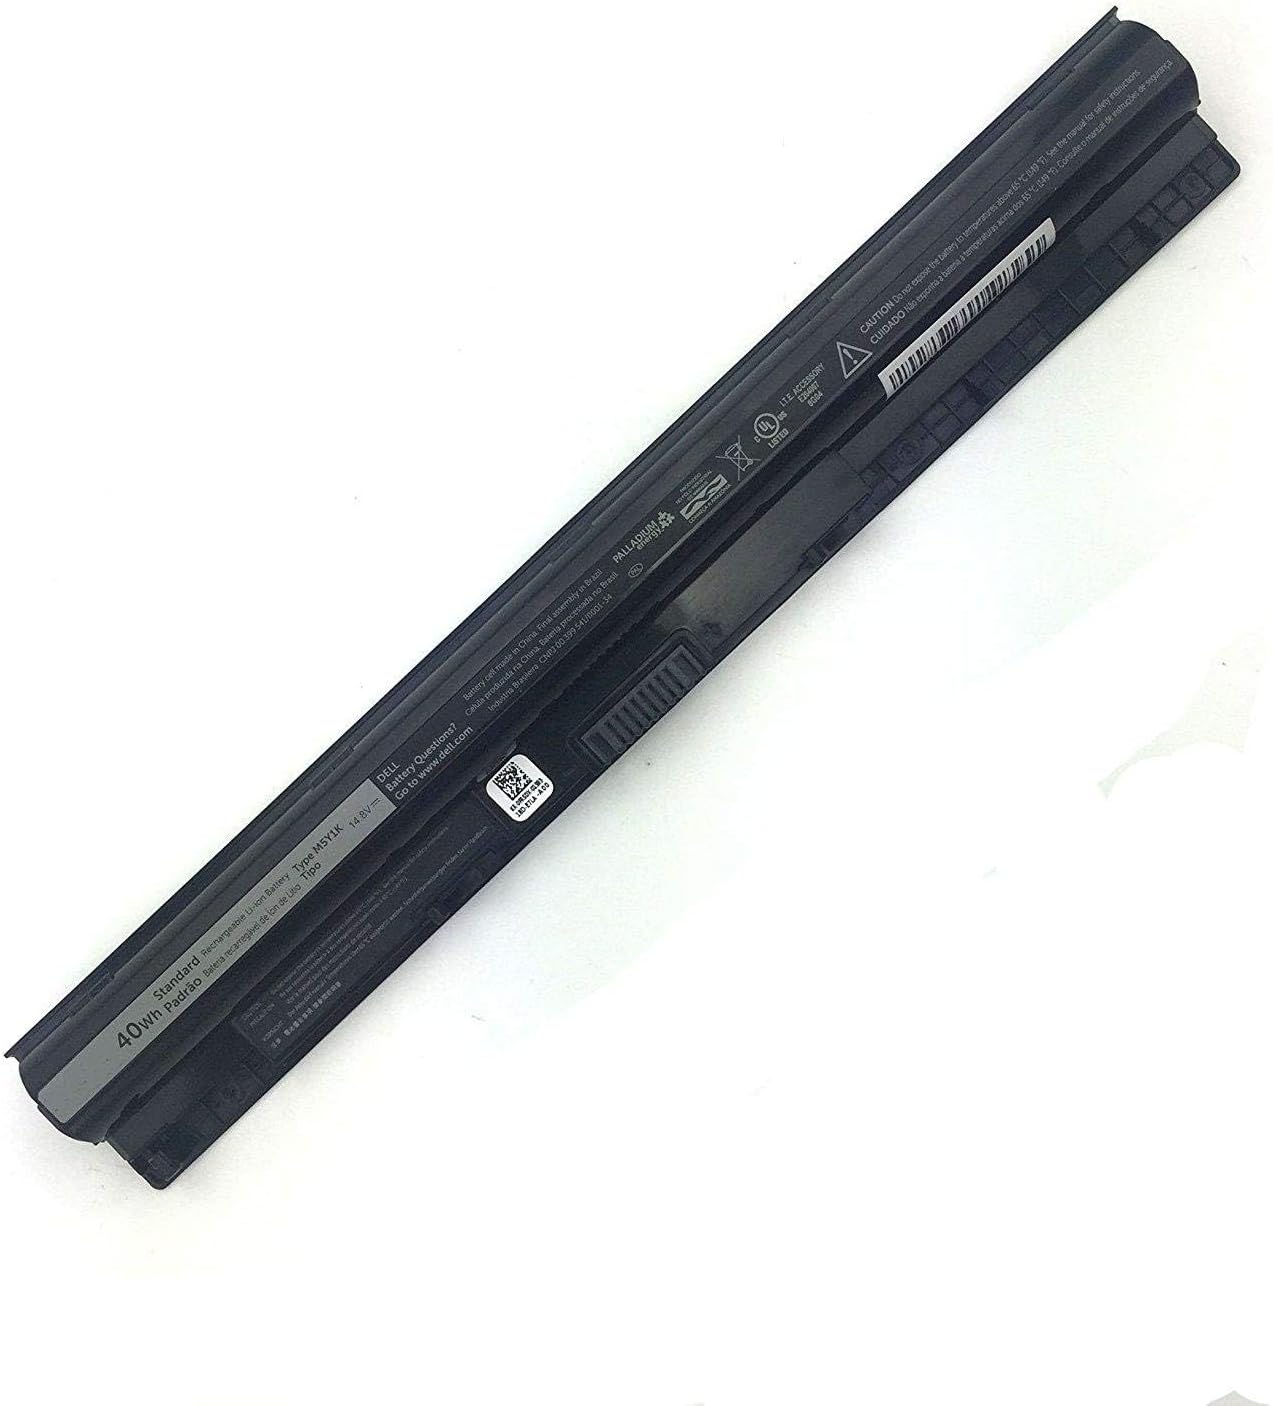 Dell Replacement Laptop Battery, 2630 mAh - Black